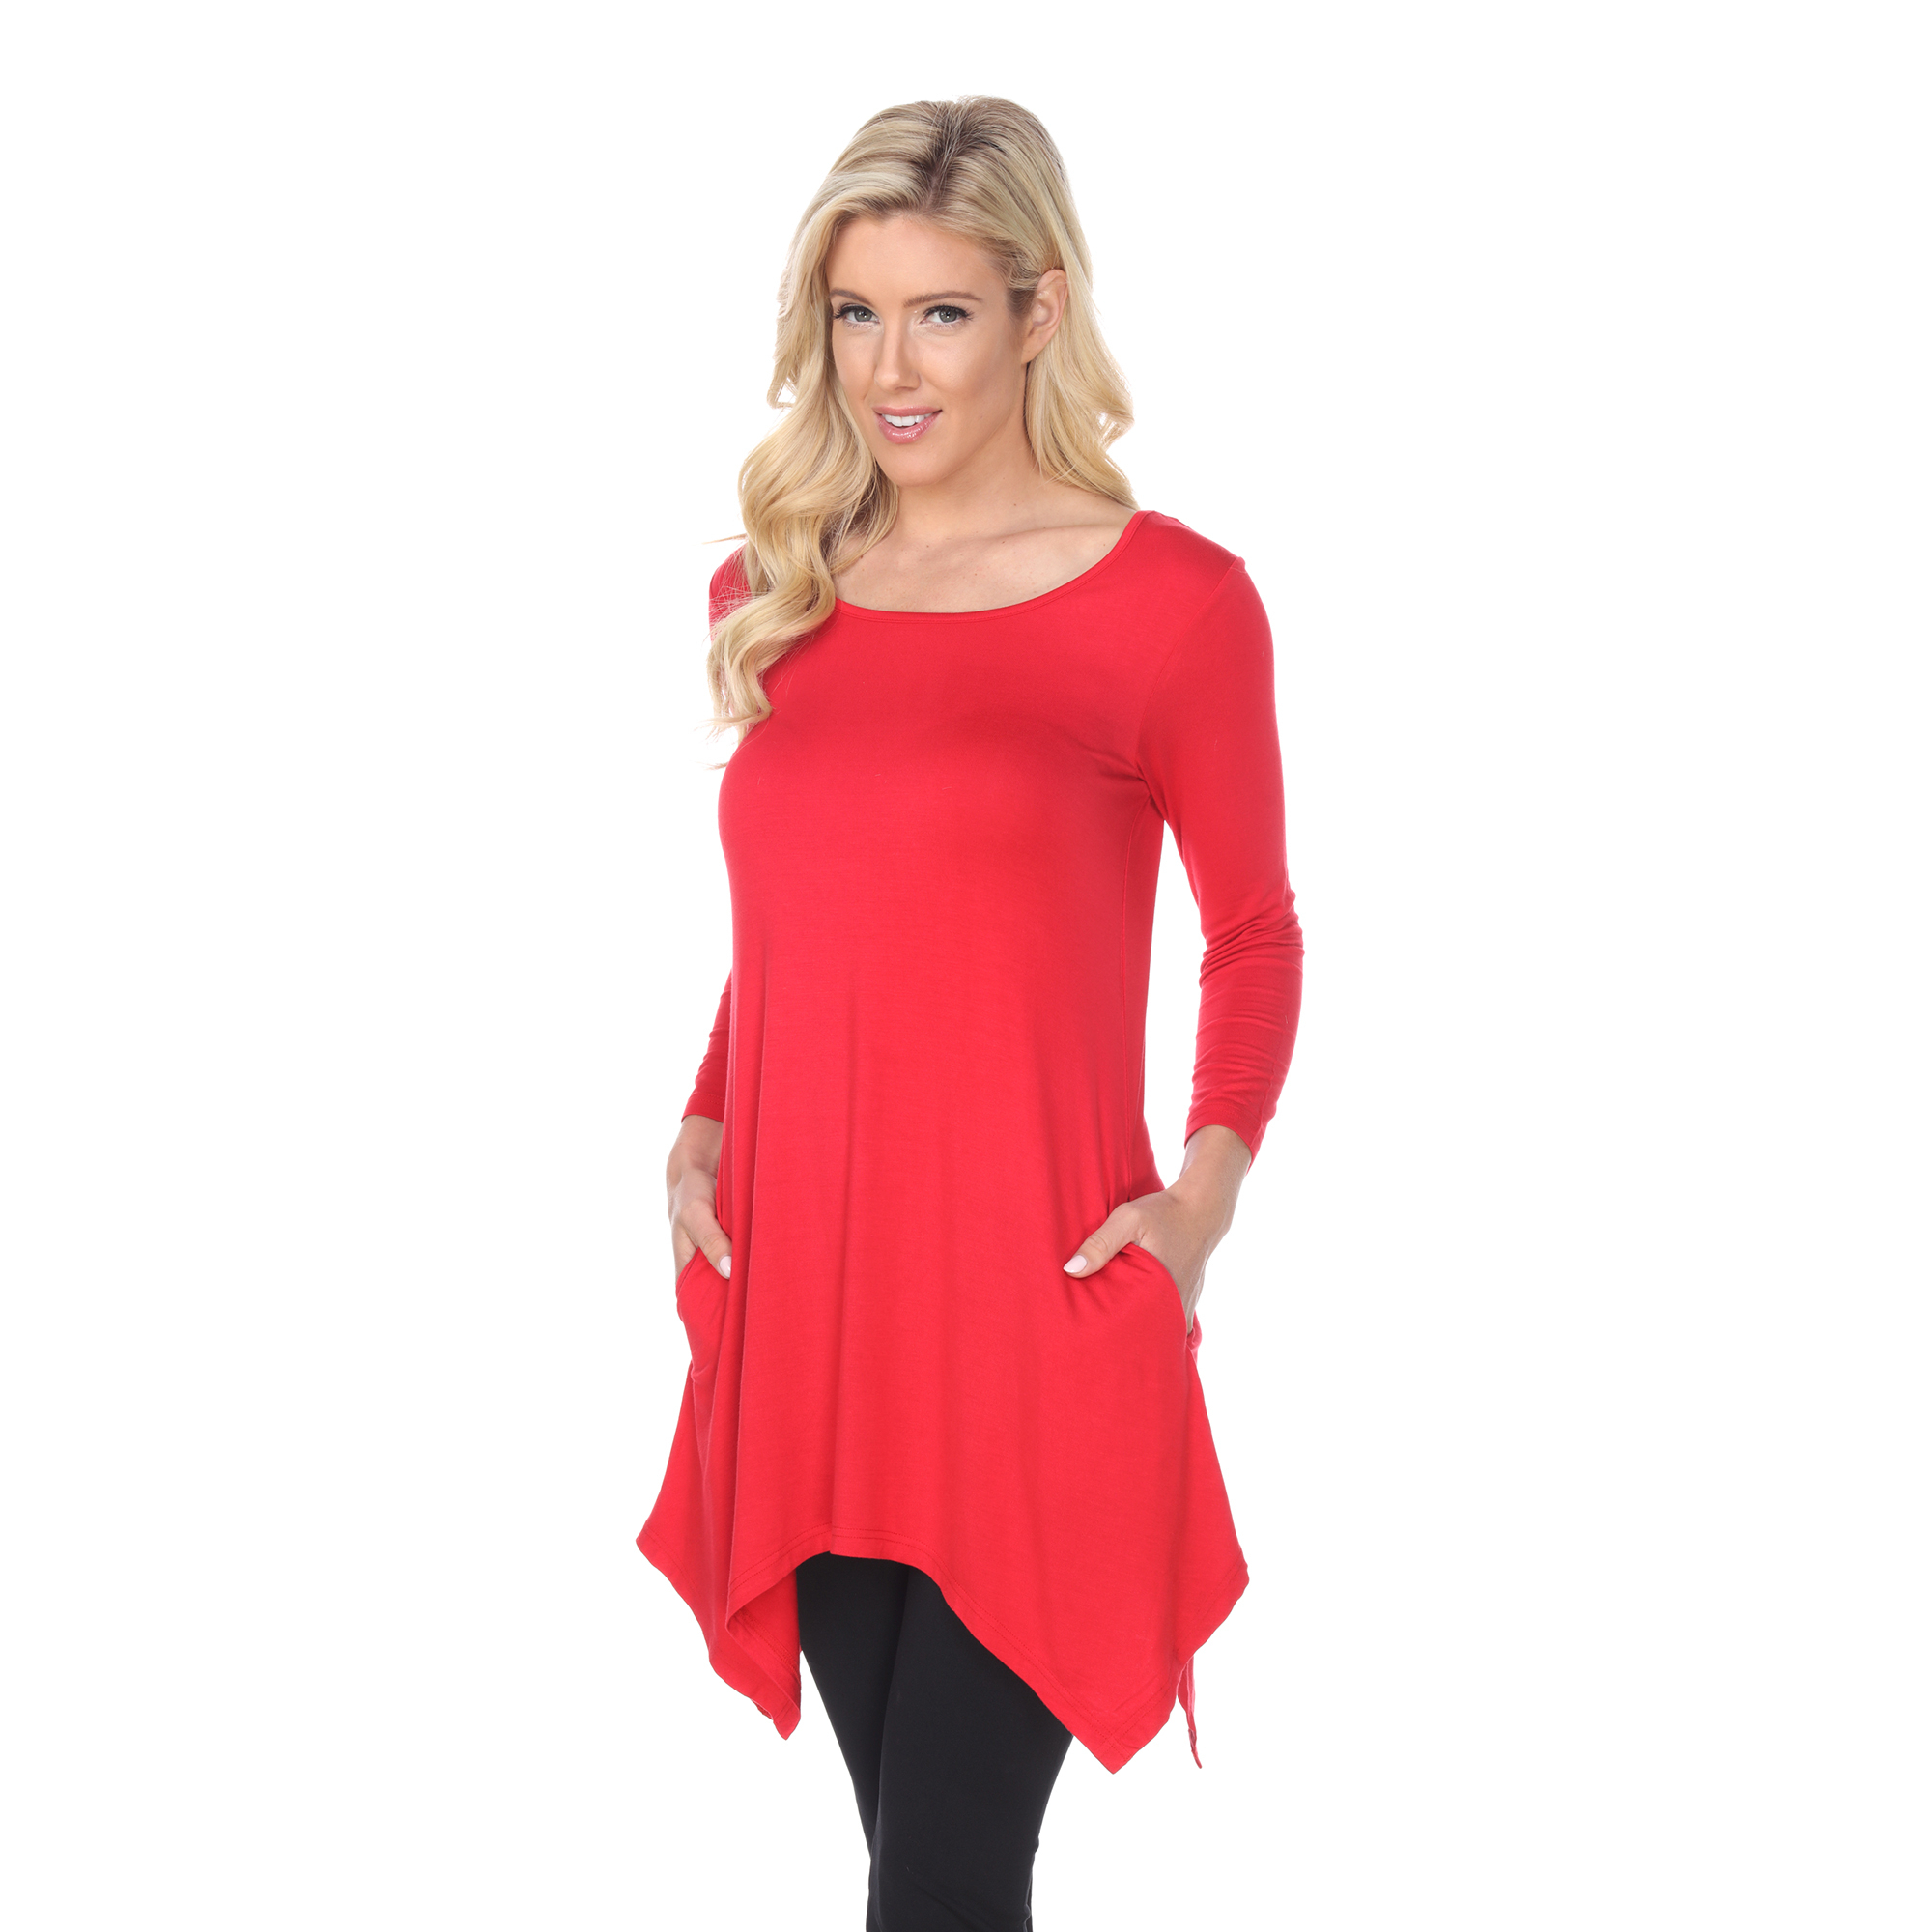 White Mark Women's Quarter Sleeve Tunic Top With Pockets - Red, 3X